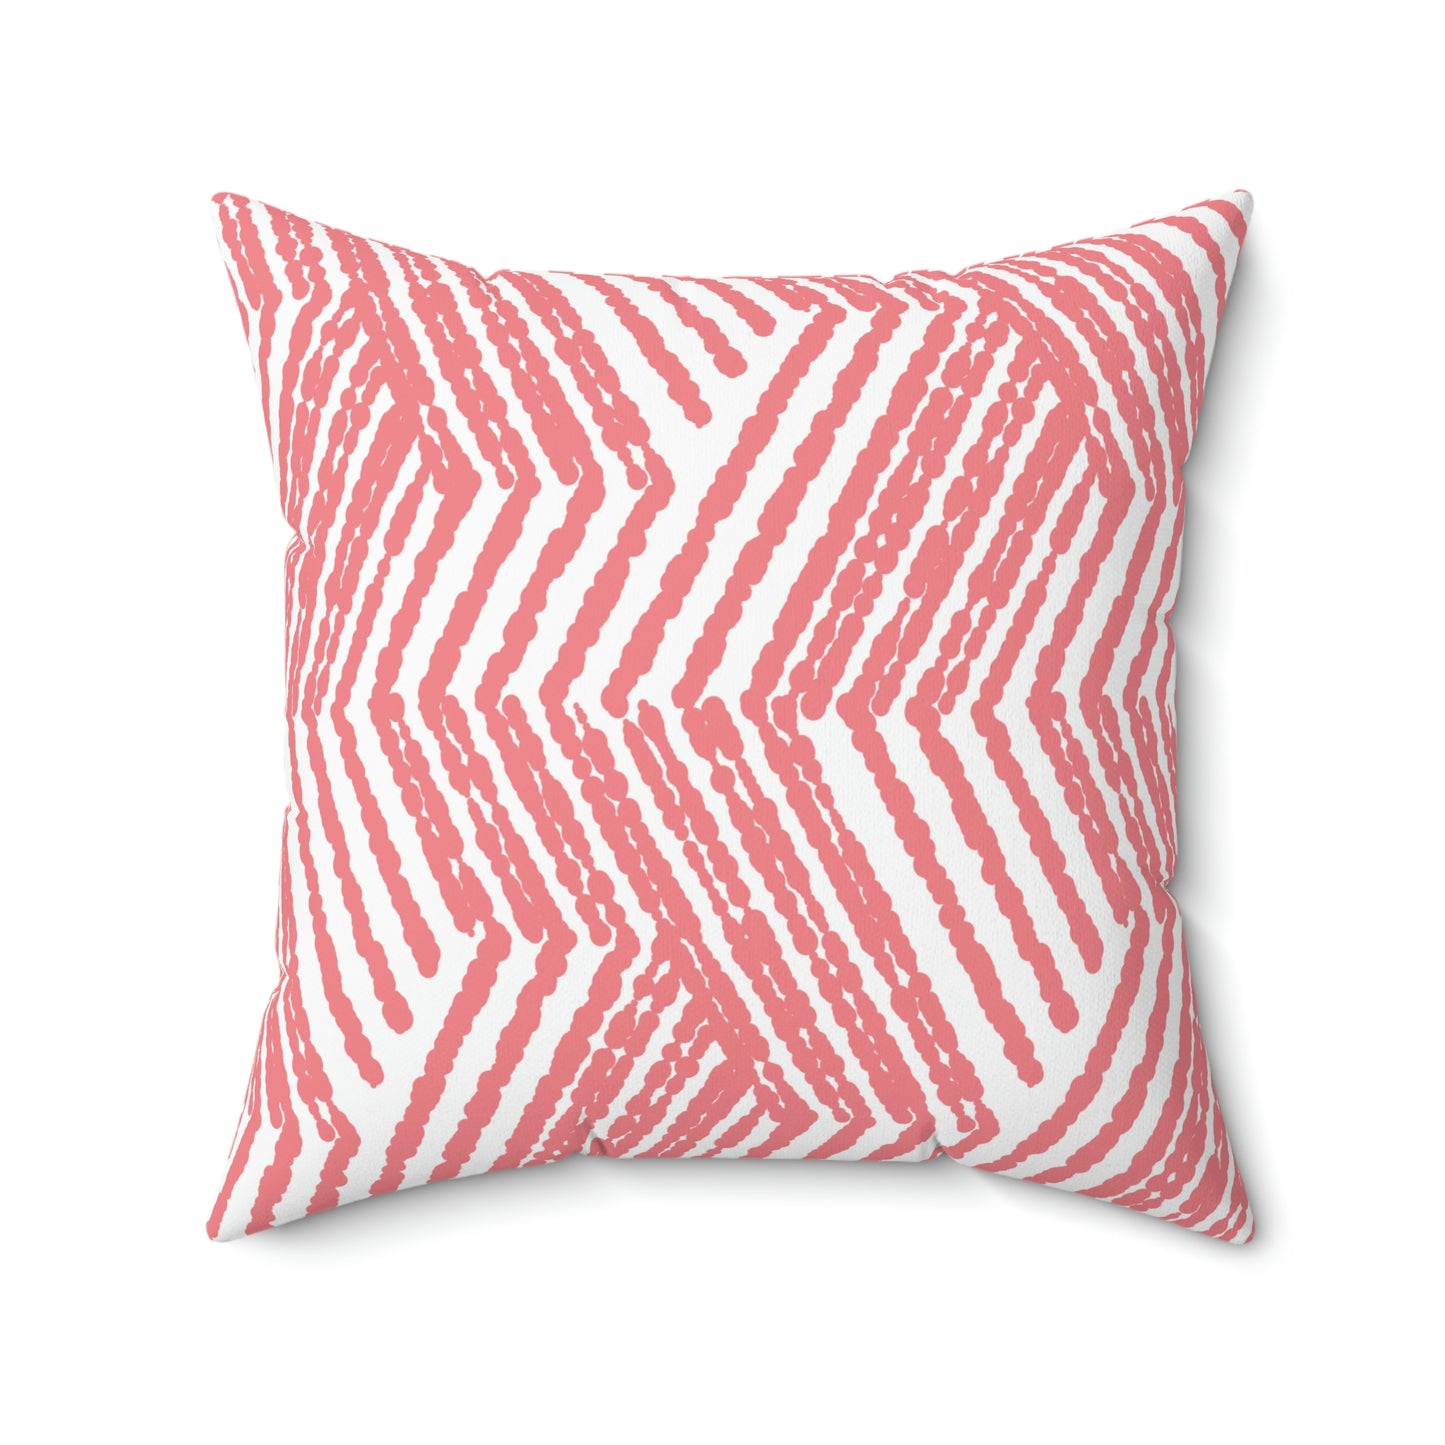 Pink and Red Geo Square Pillow Cover